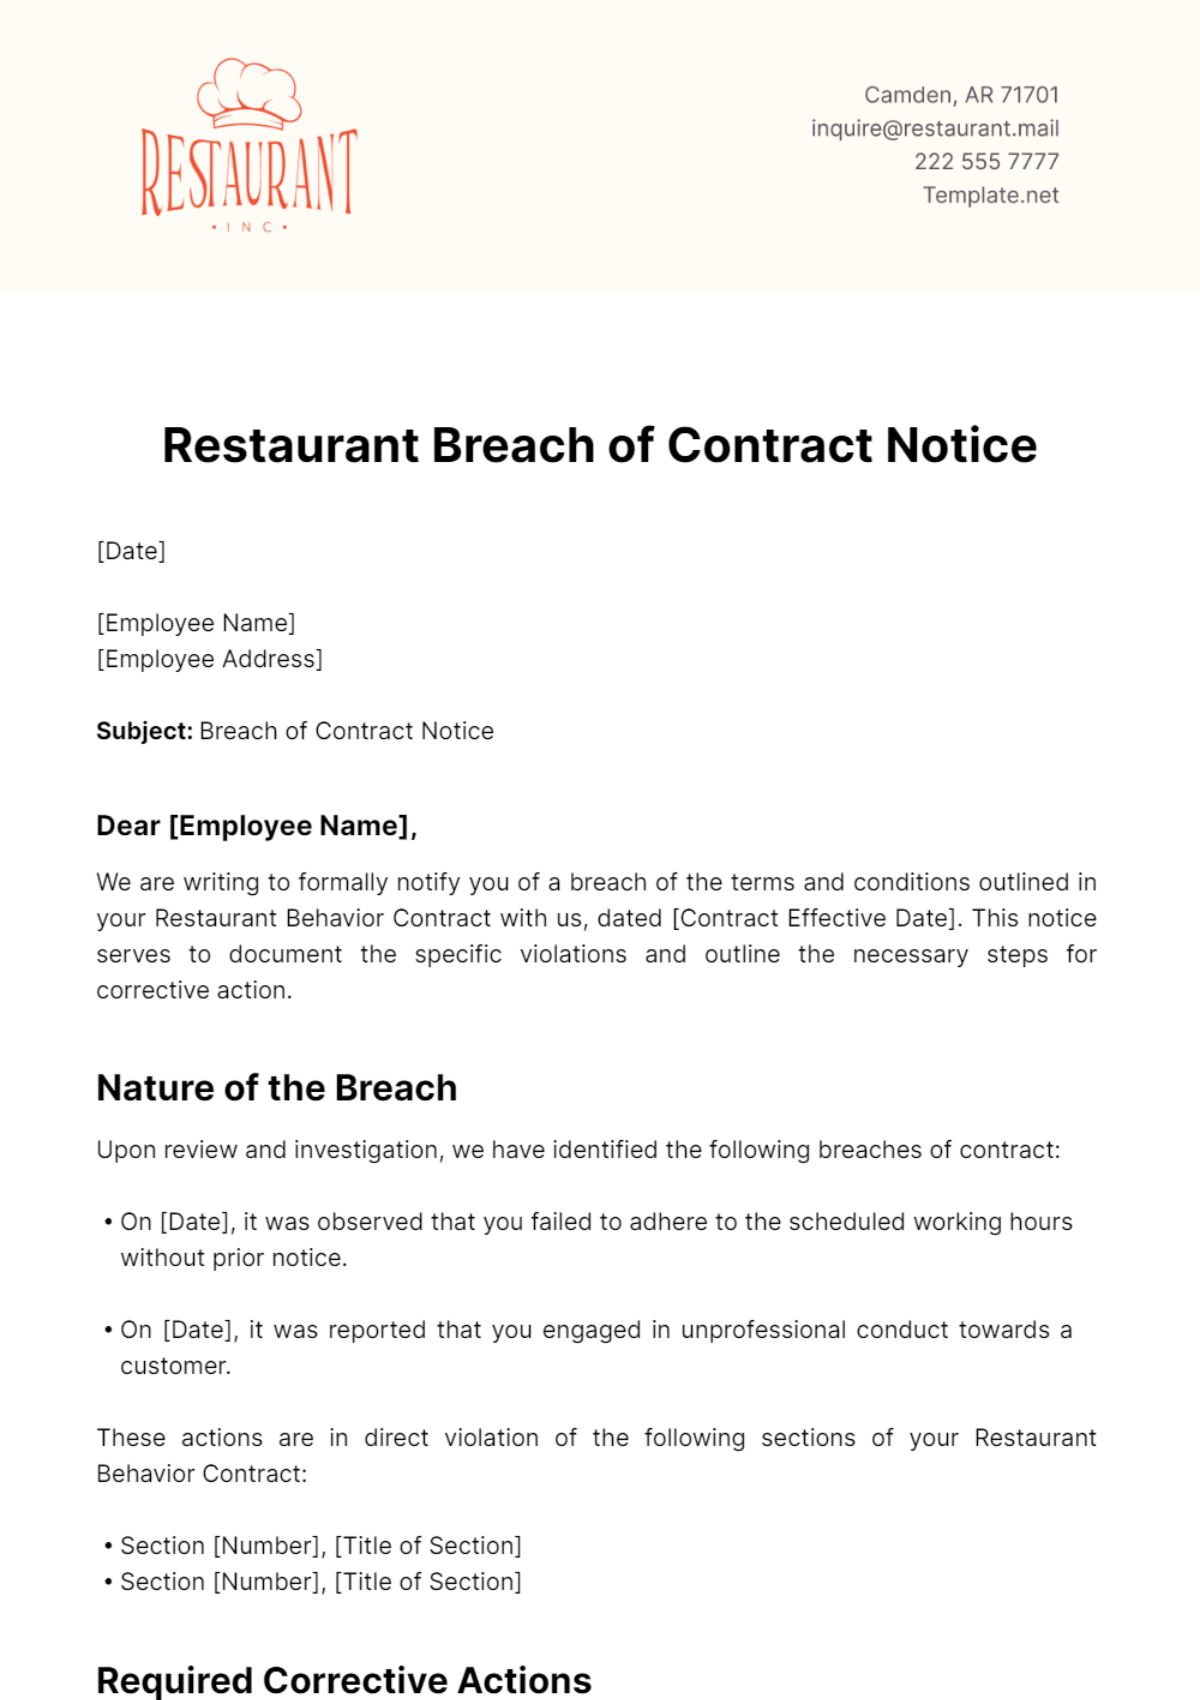 Free Restaurant Breach of Contract Notice Template